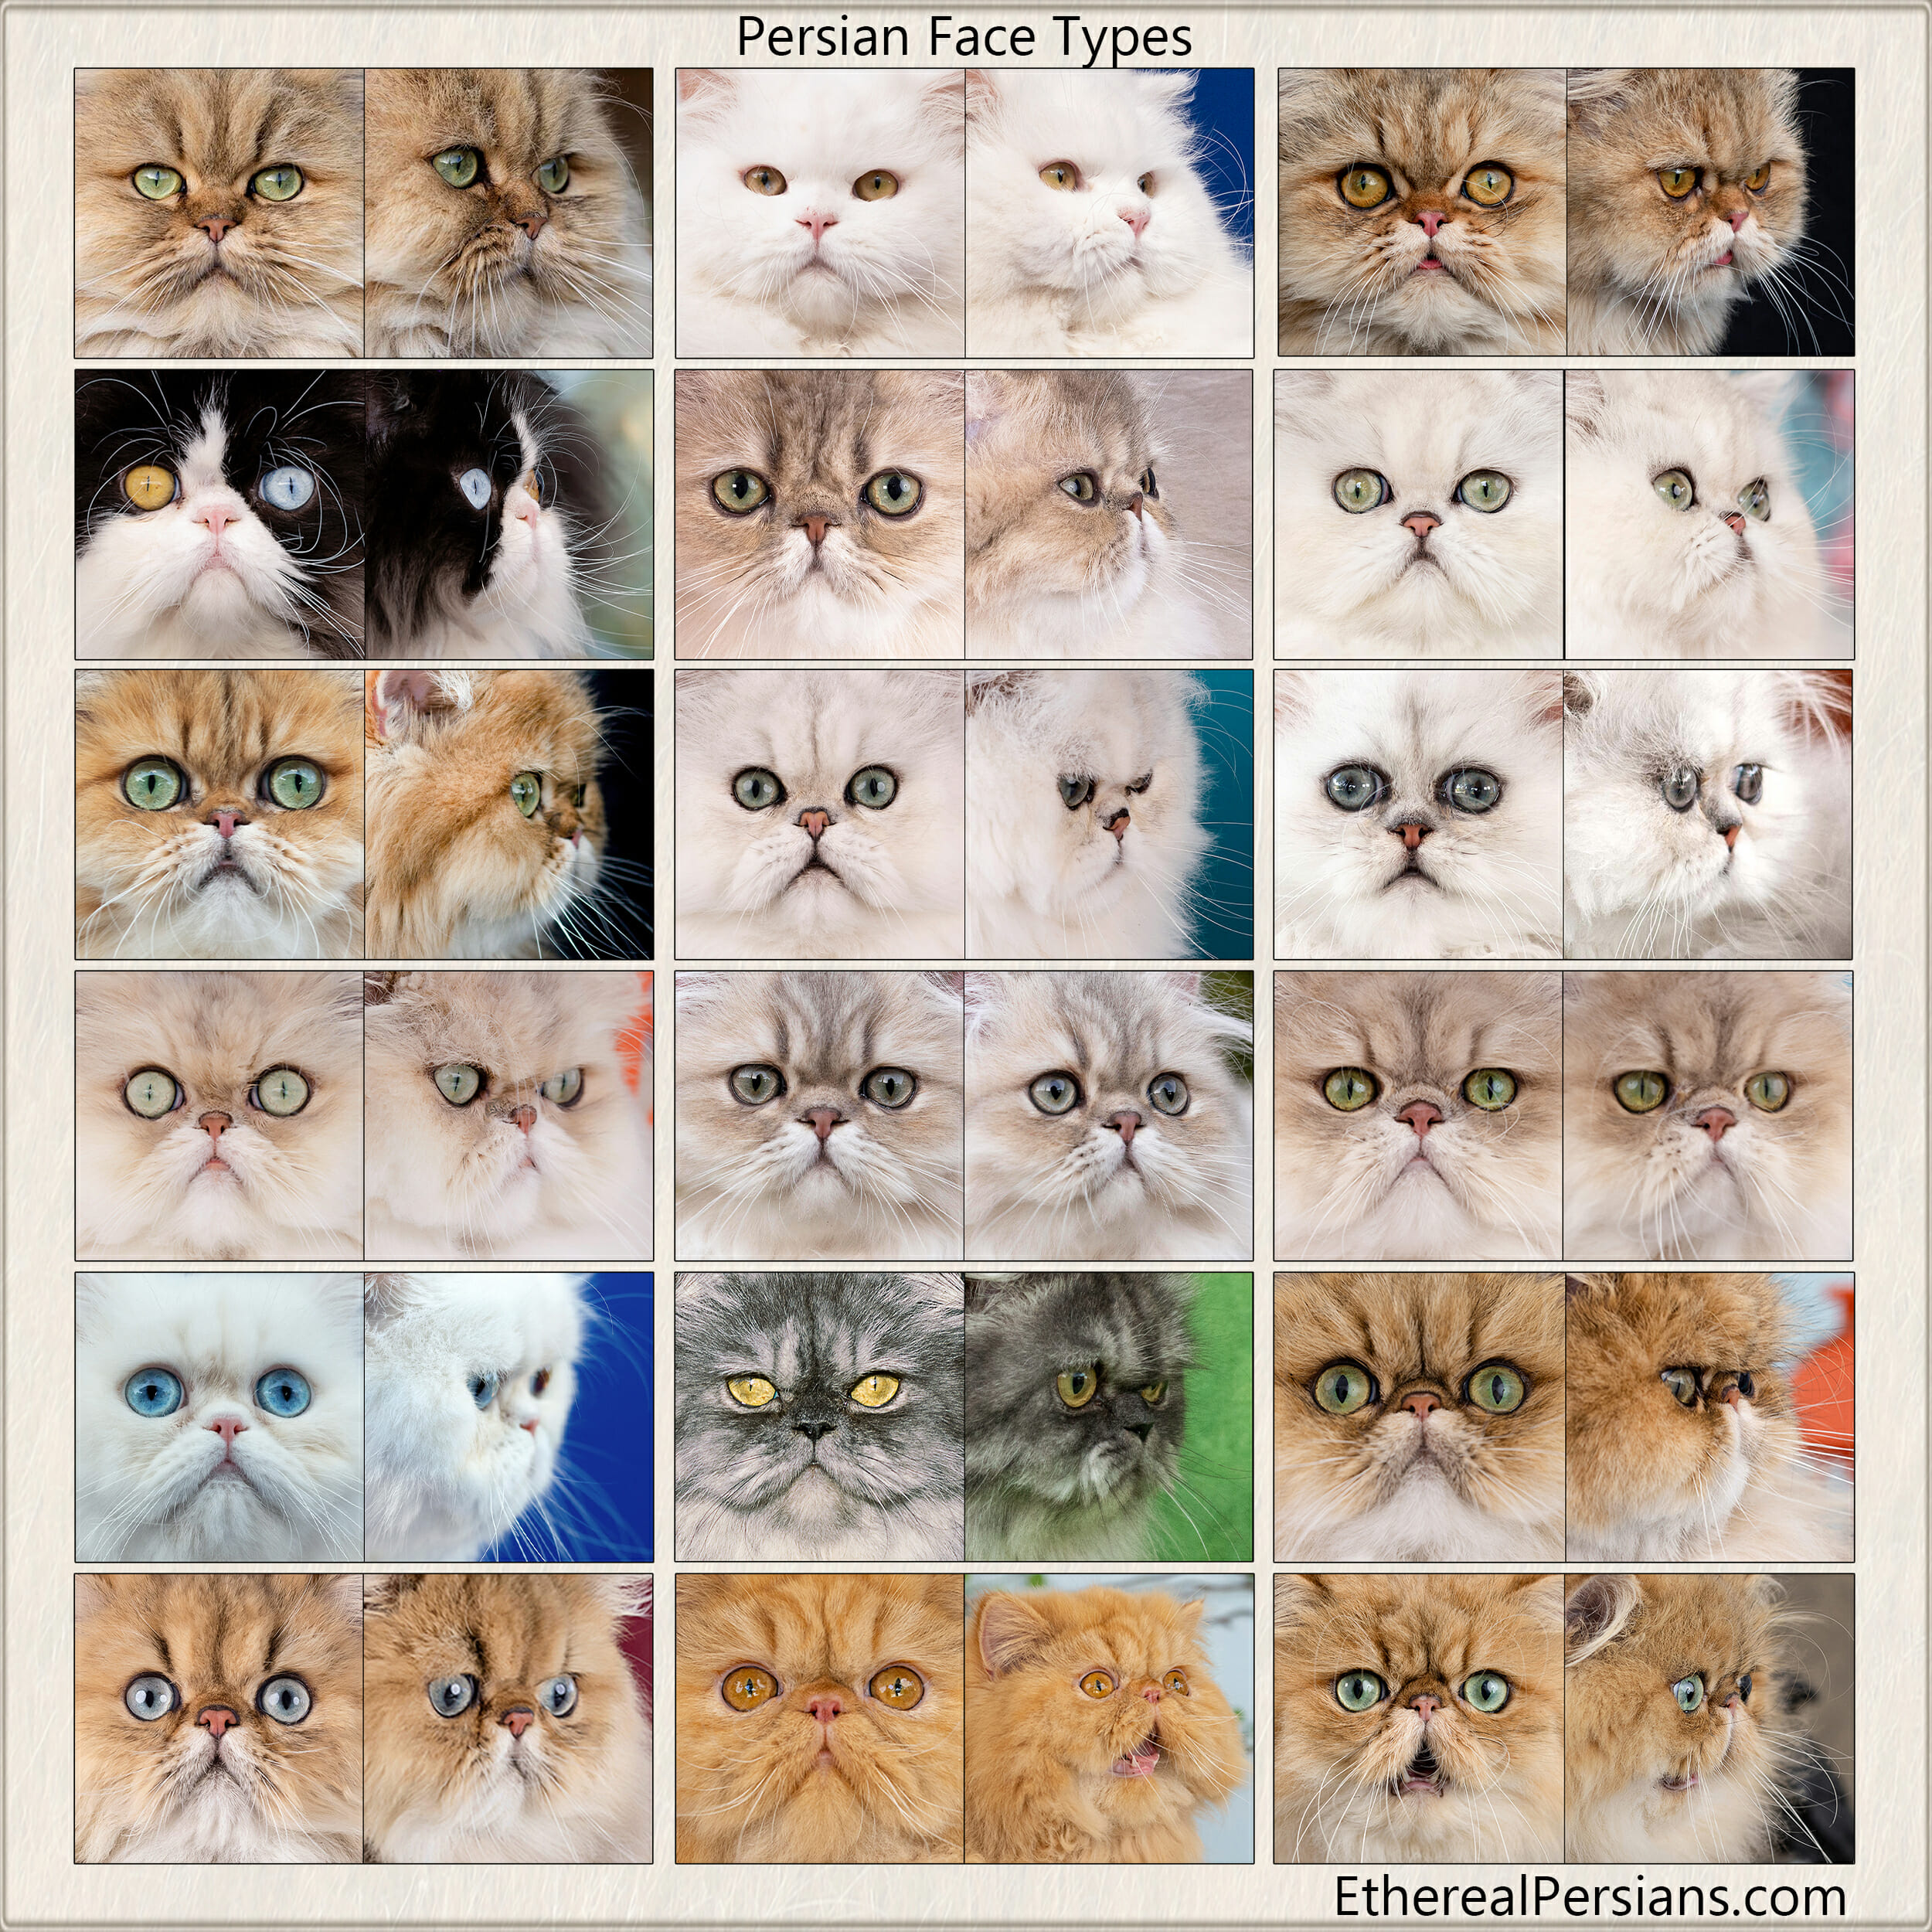 Different brachycephalic face types of 18 persians. Front and side views.